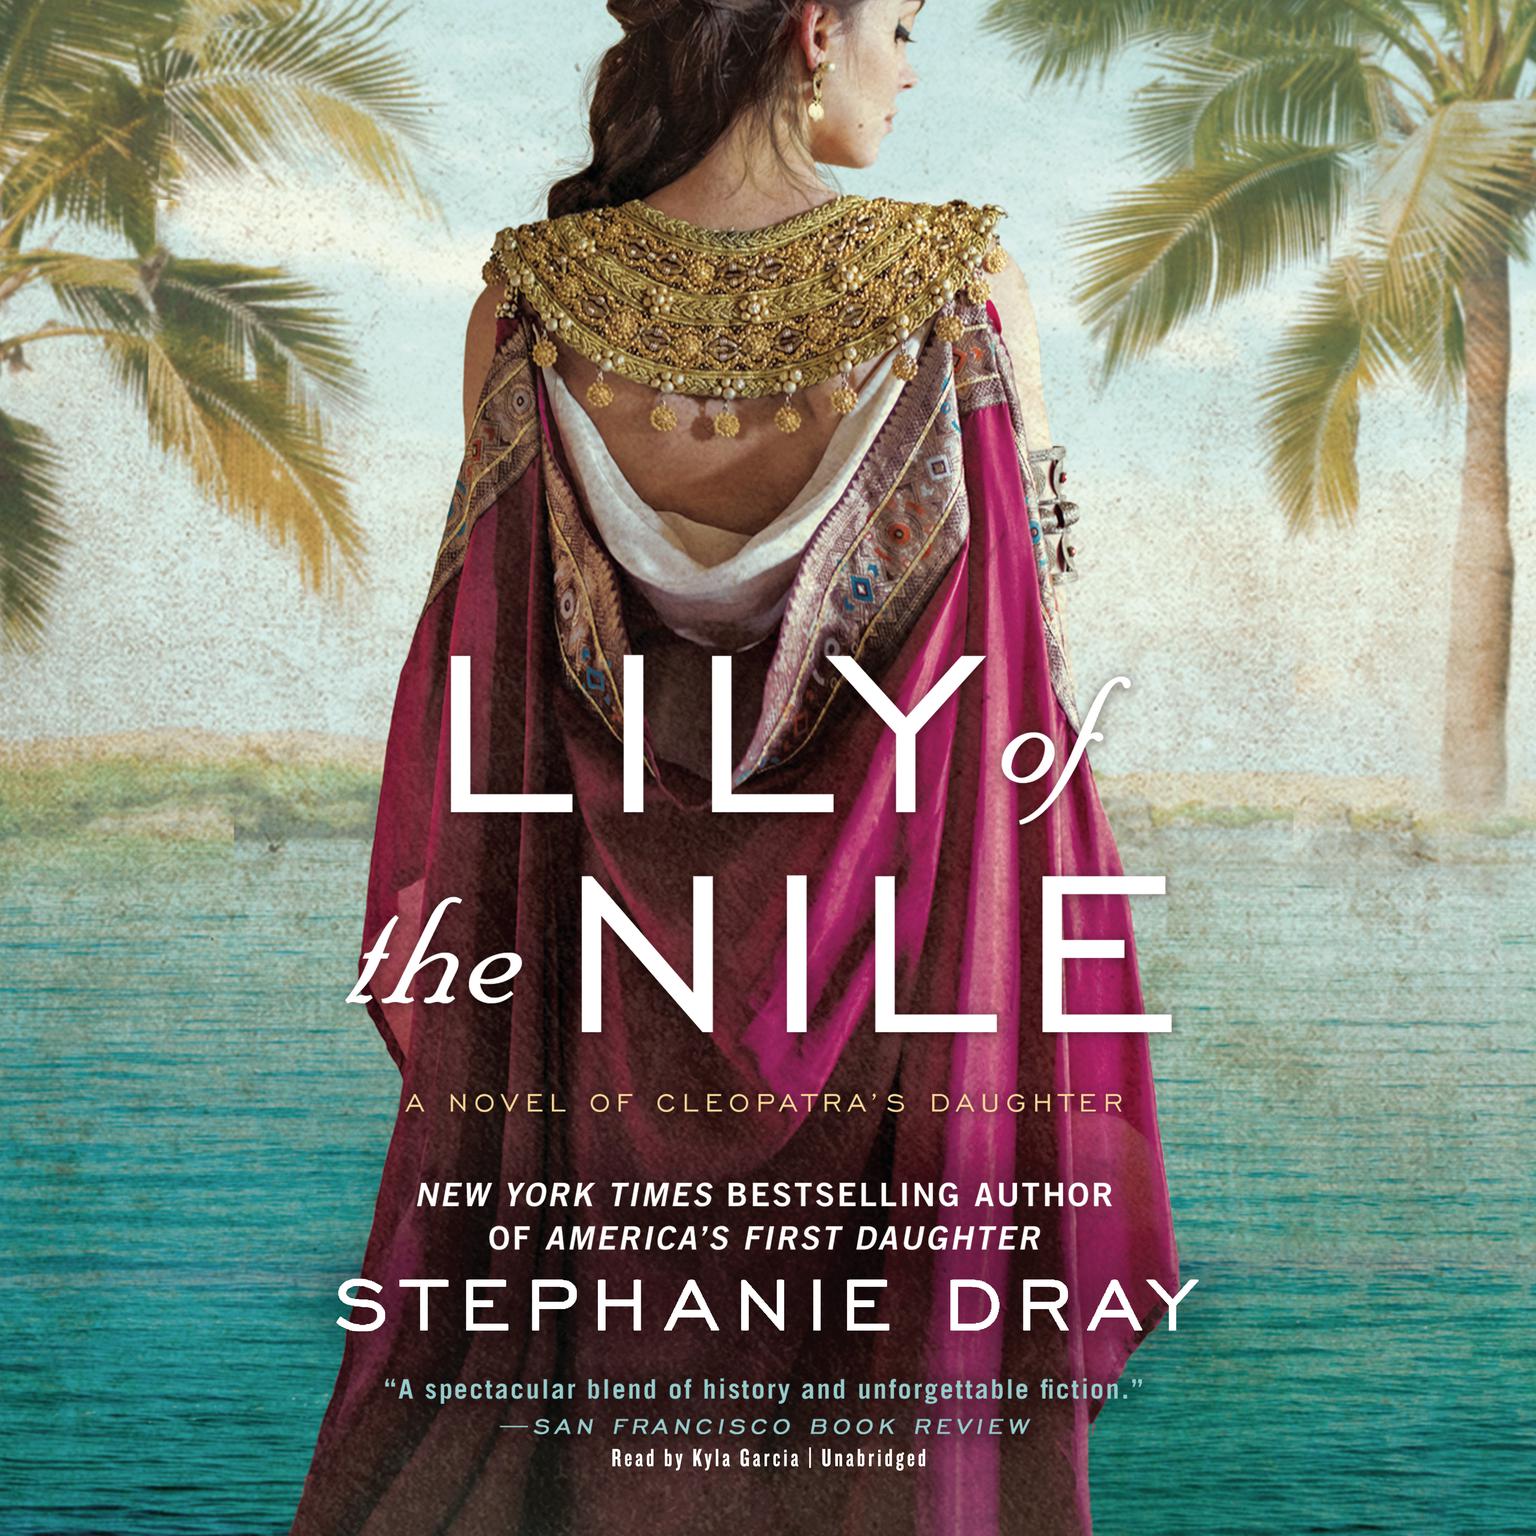 Lily of the Nile: A Novel of Cleopatra’s Daughter Audiobook, by Stephanie Dray